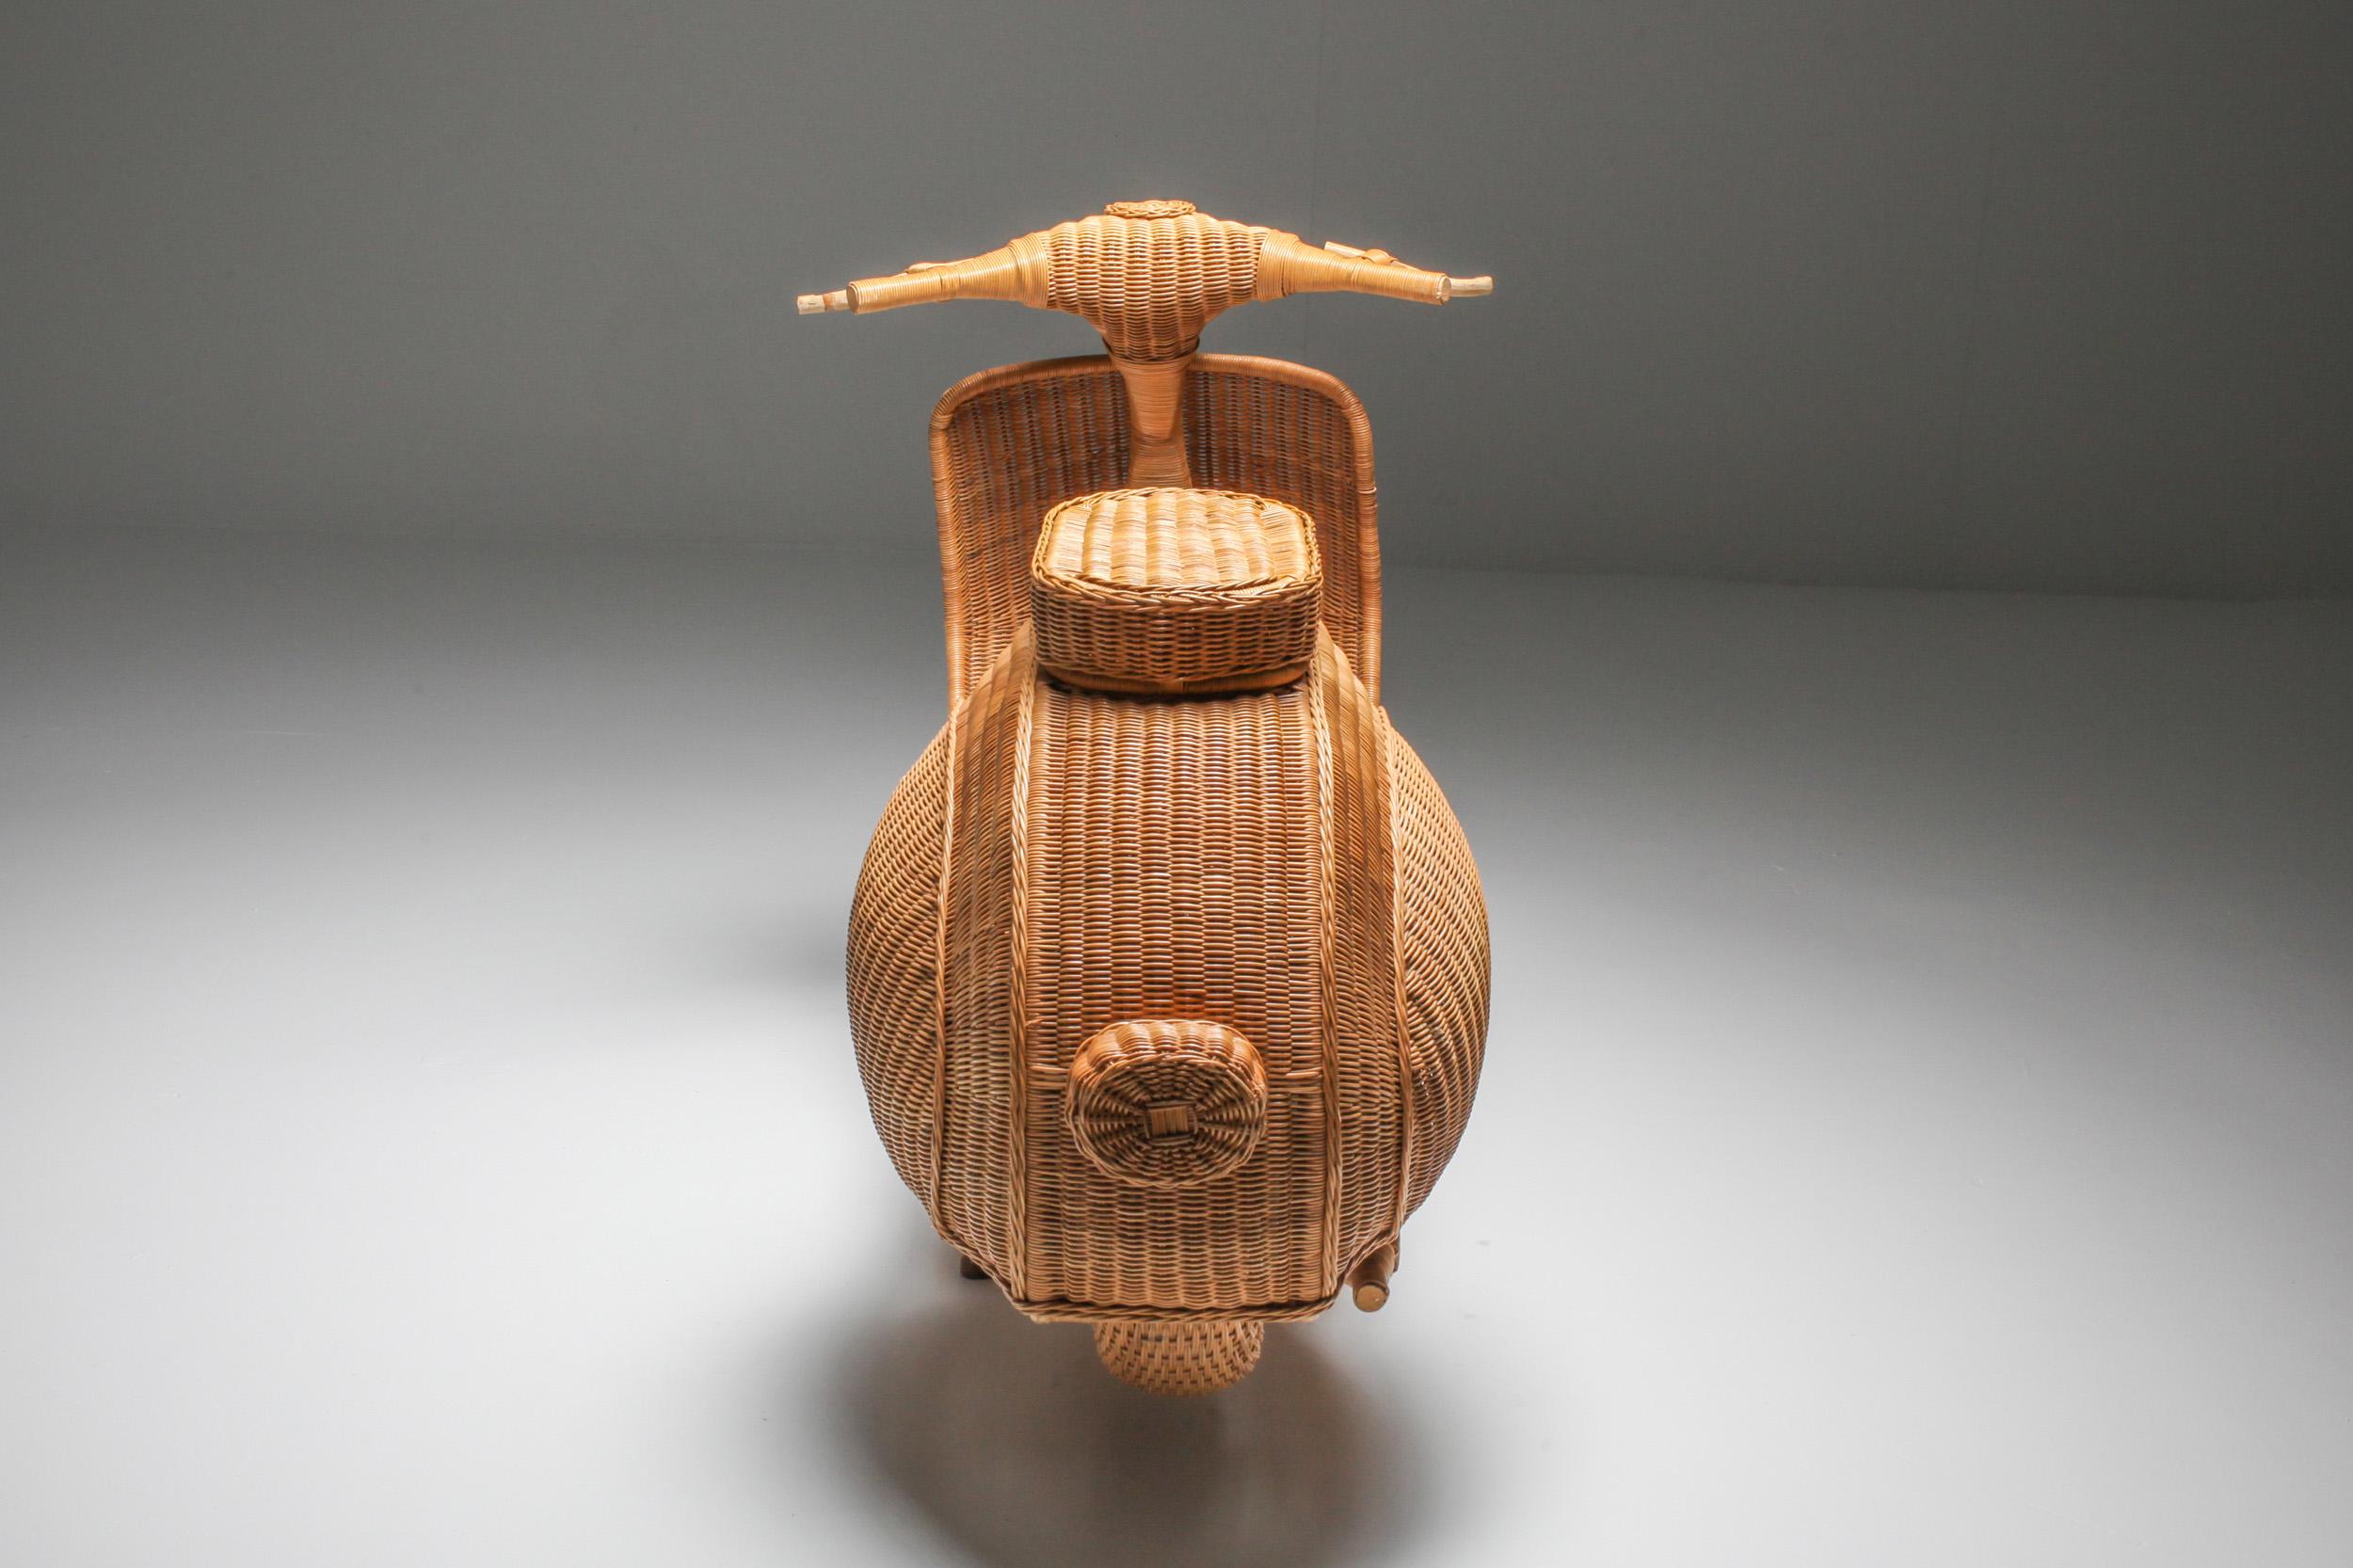 Hollywood Regency Bamboo Wicker Vespa Scooter from the 1970s